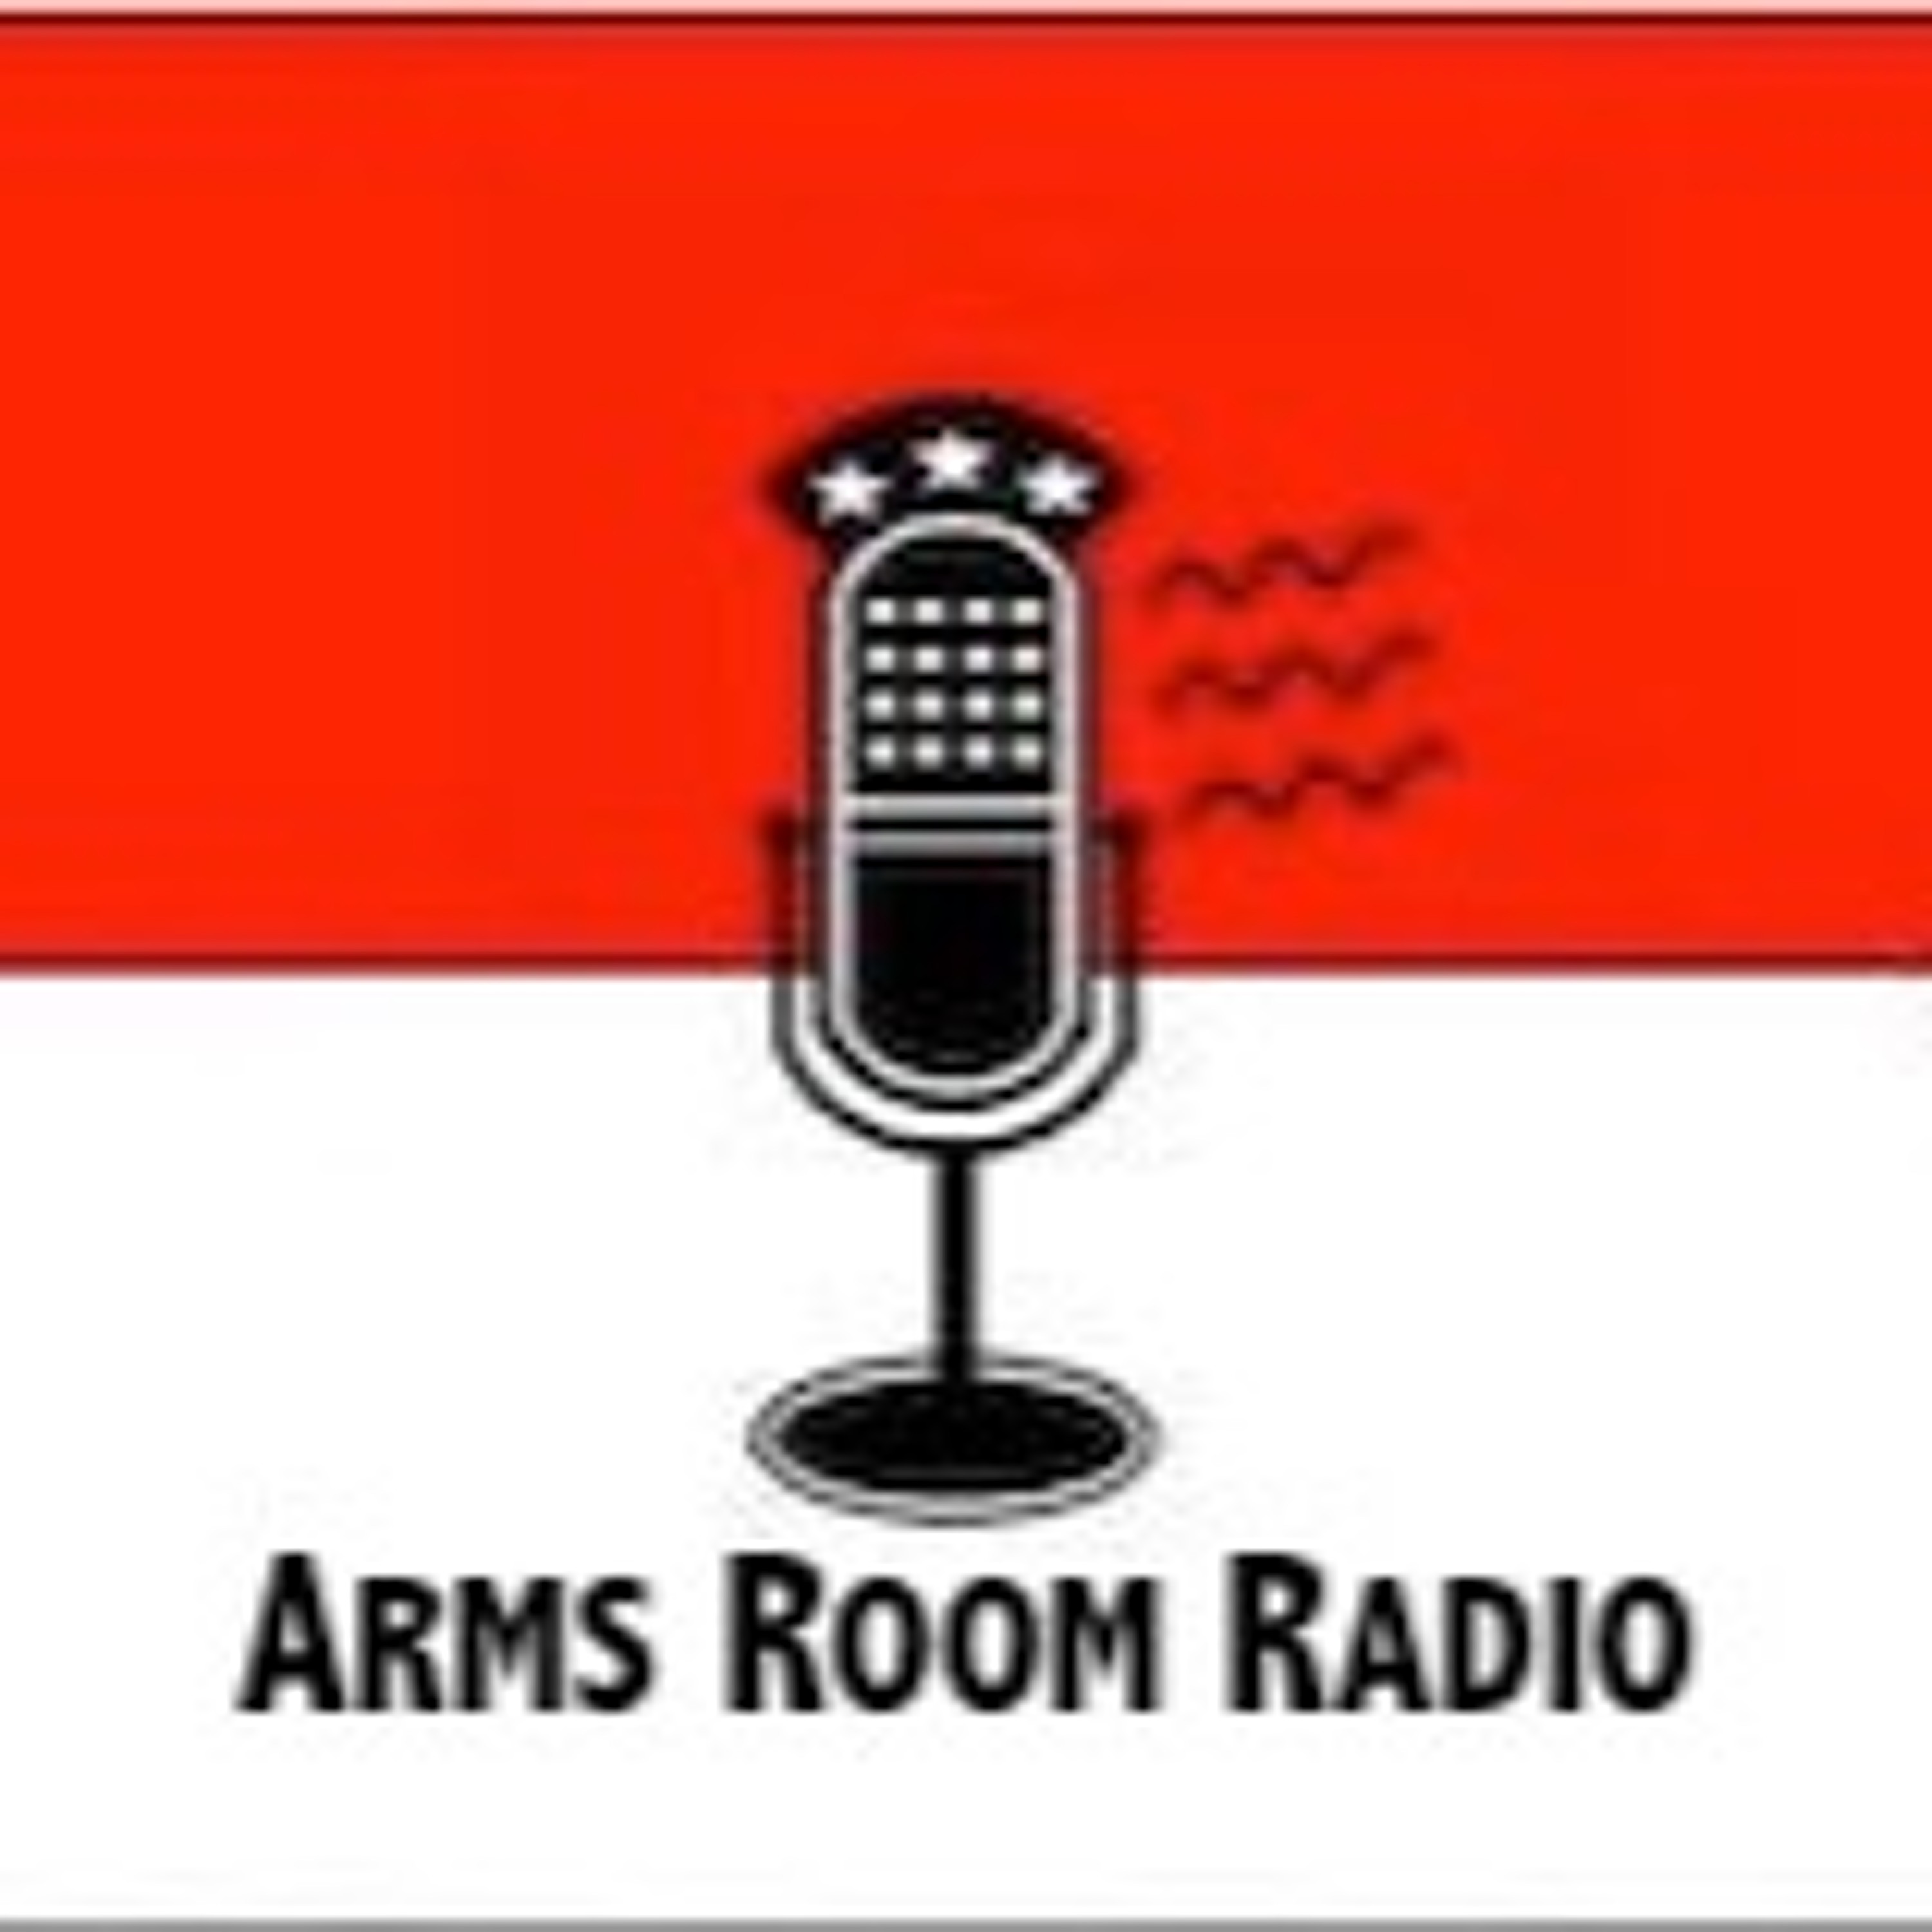 ArmsRoomRadio 06.08.19 Someone tried to murder Kevin!